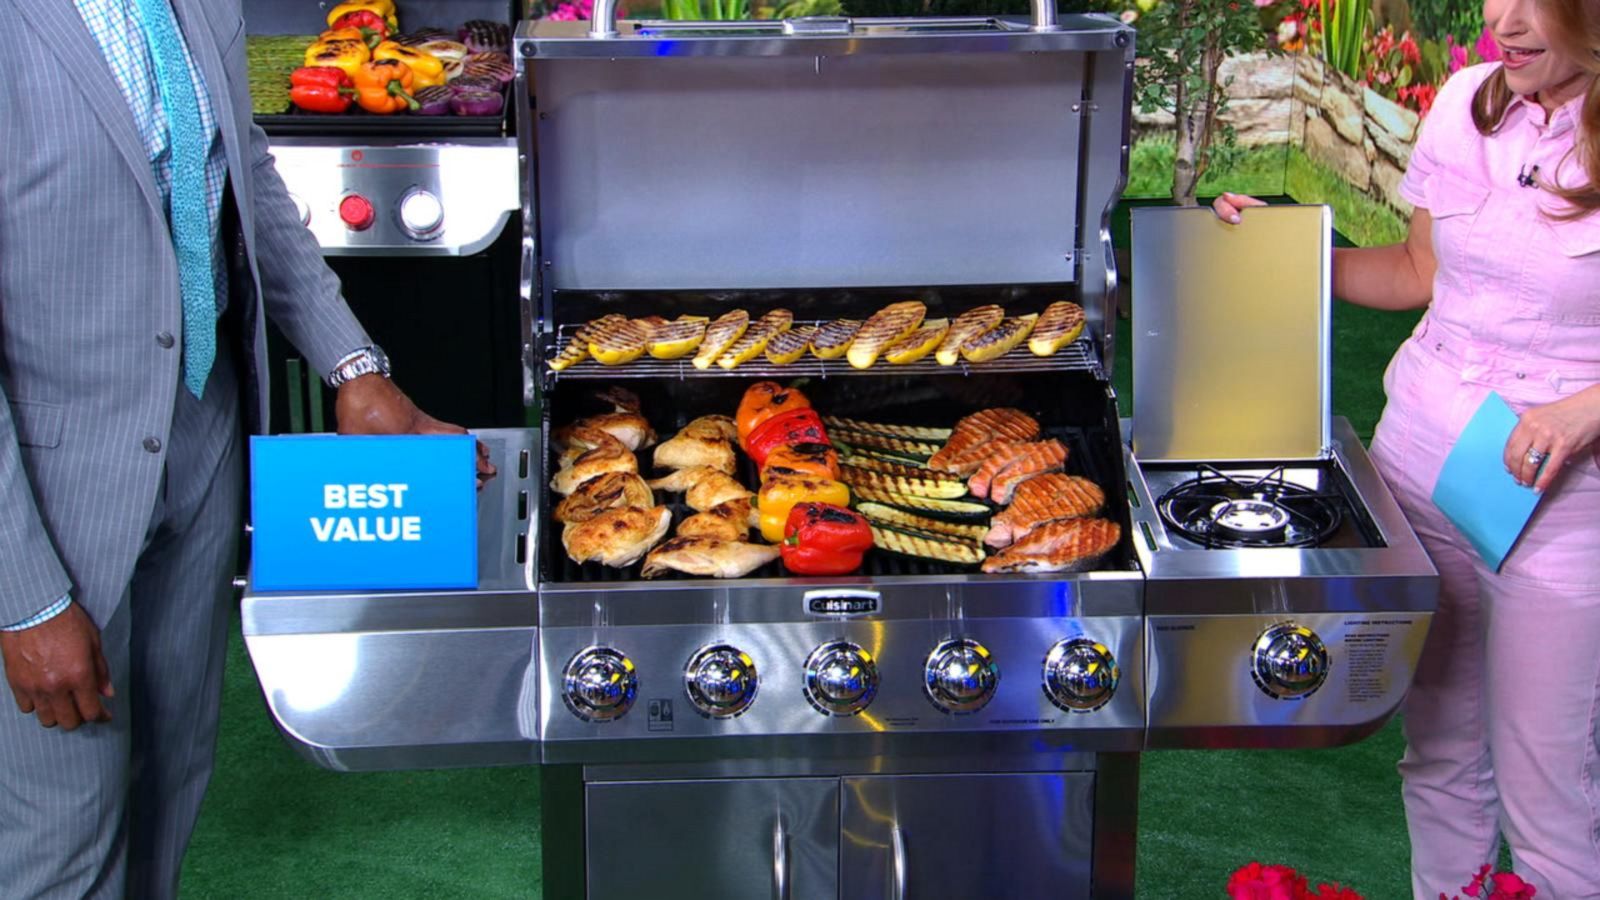 lindre dagsorden vej Best grills for every cookout this summer - Good Morning America